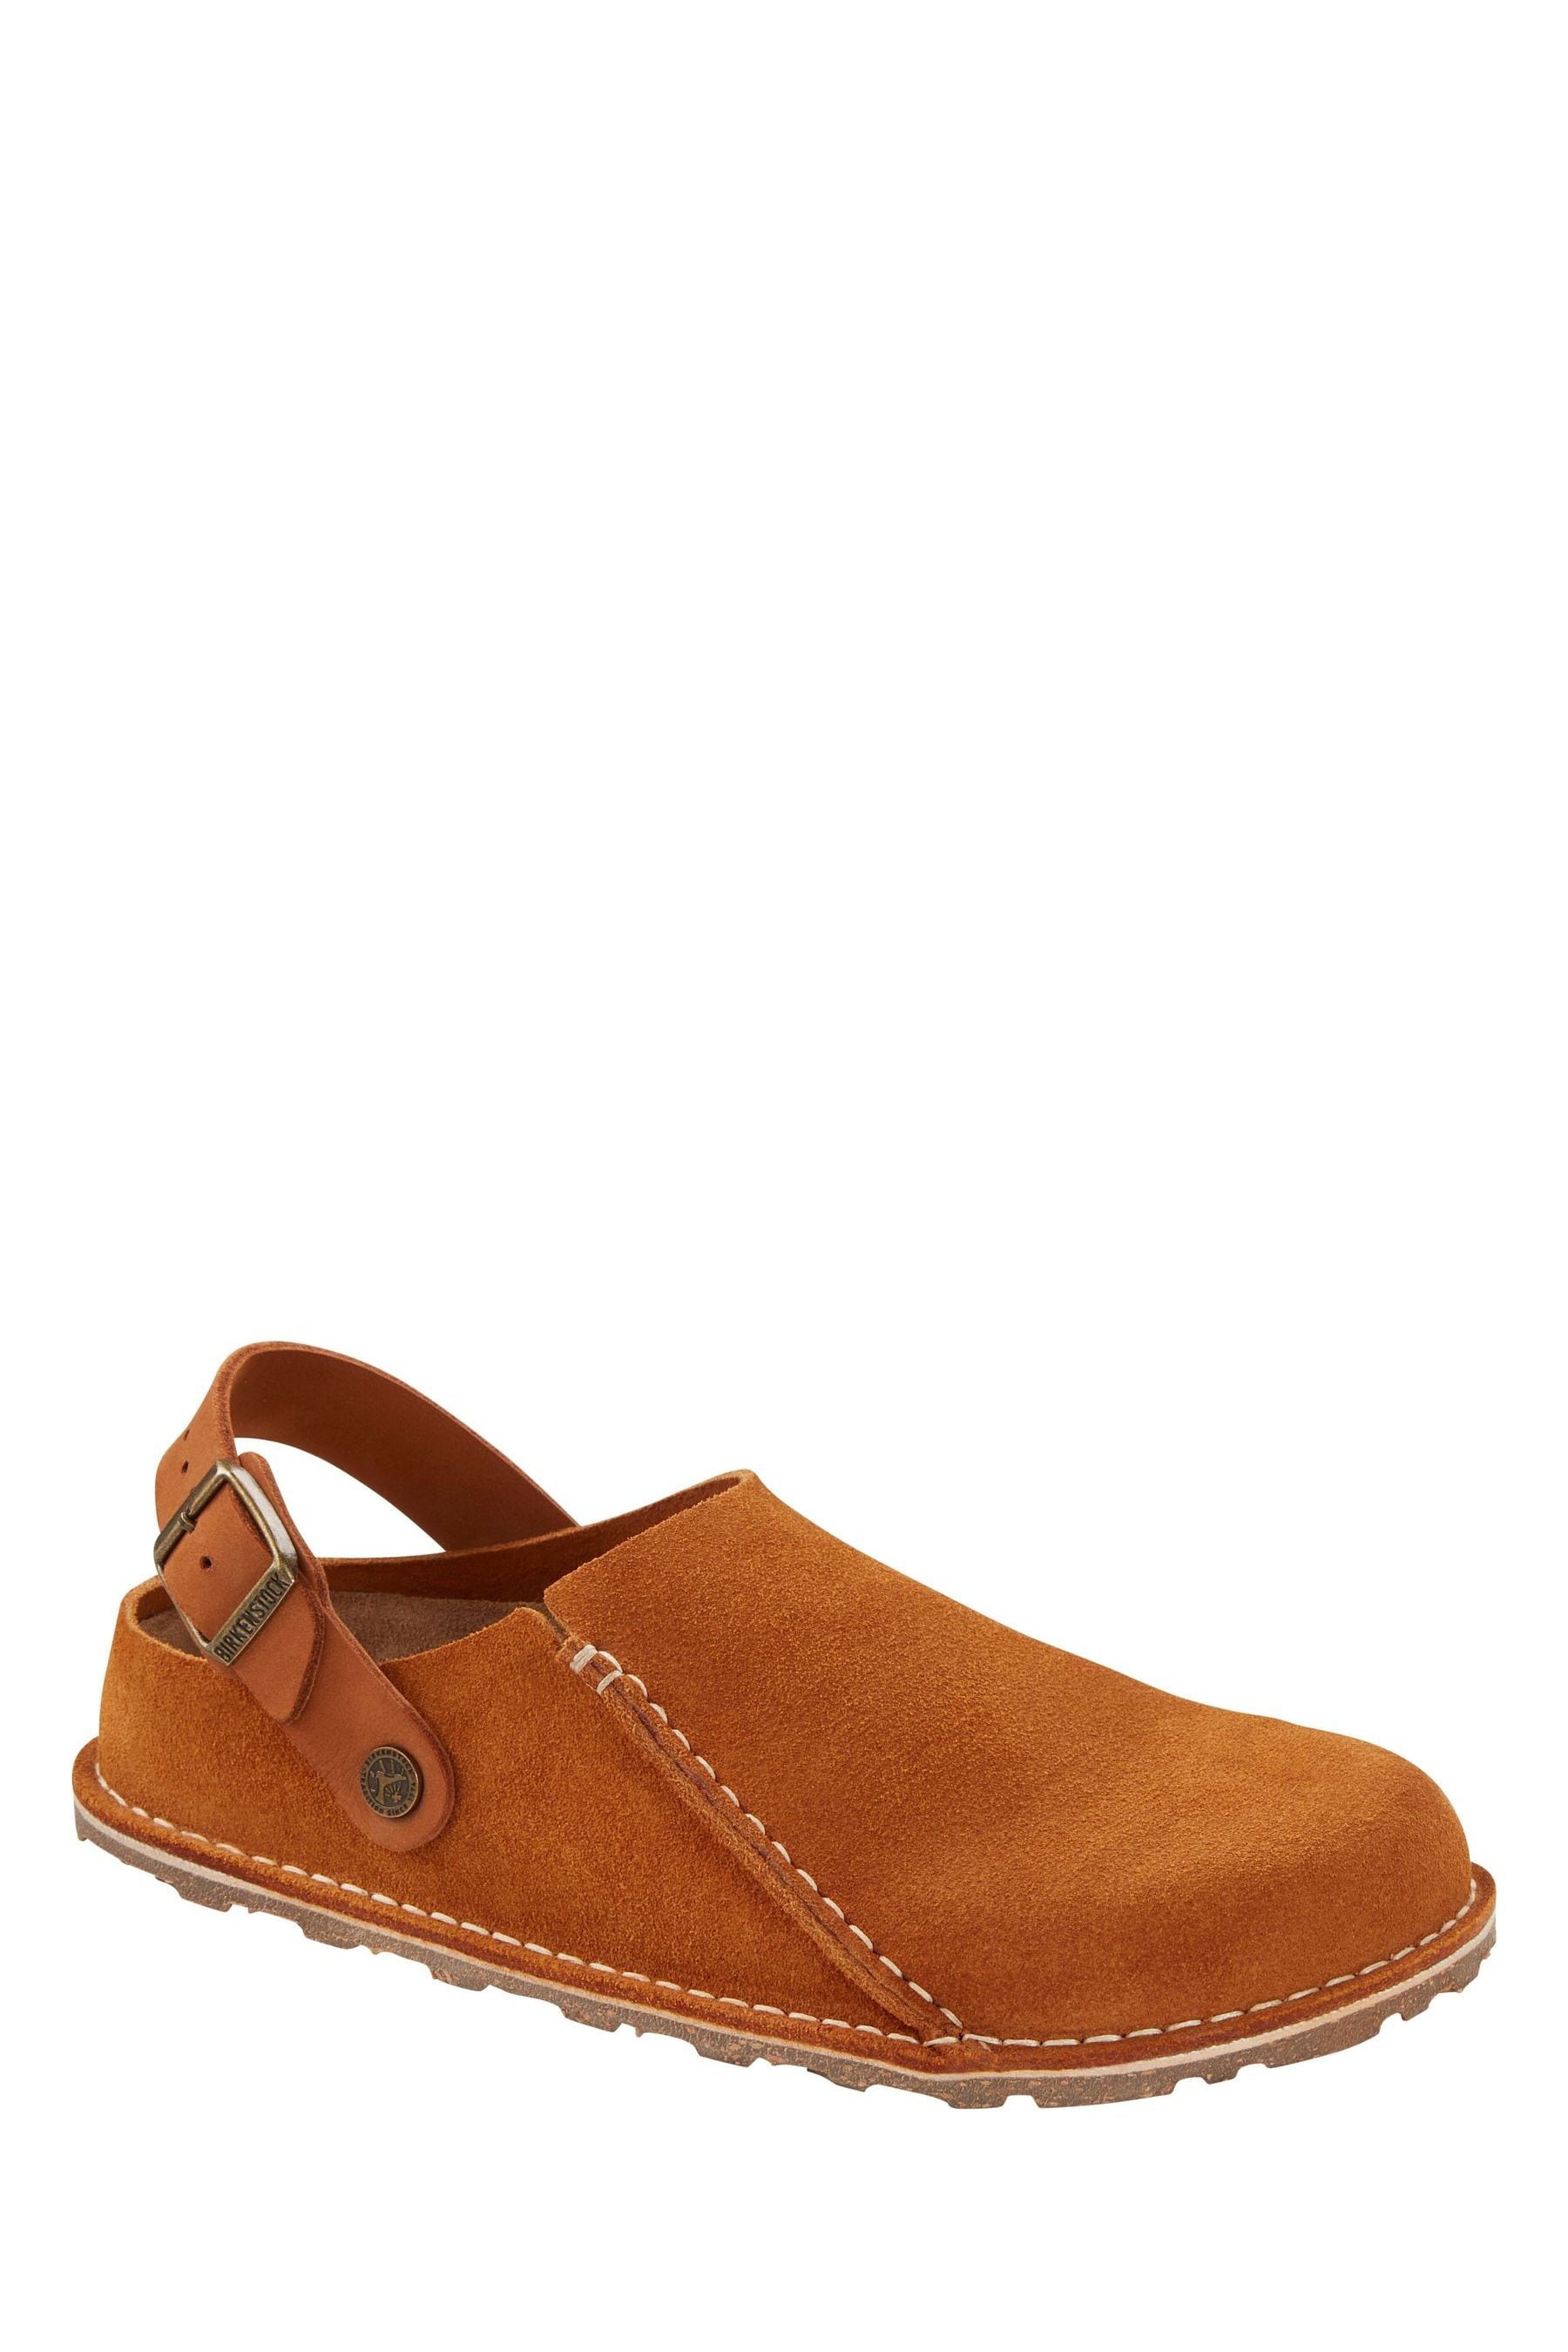 Buy Birkenstock Lutry Premium Back Brown Strap Clogs from the Next UK ...